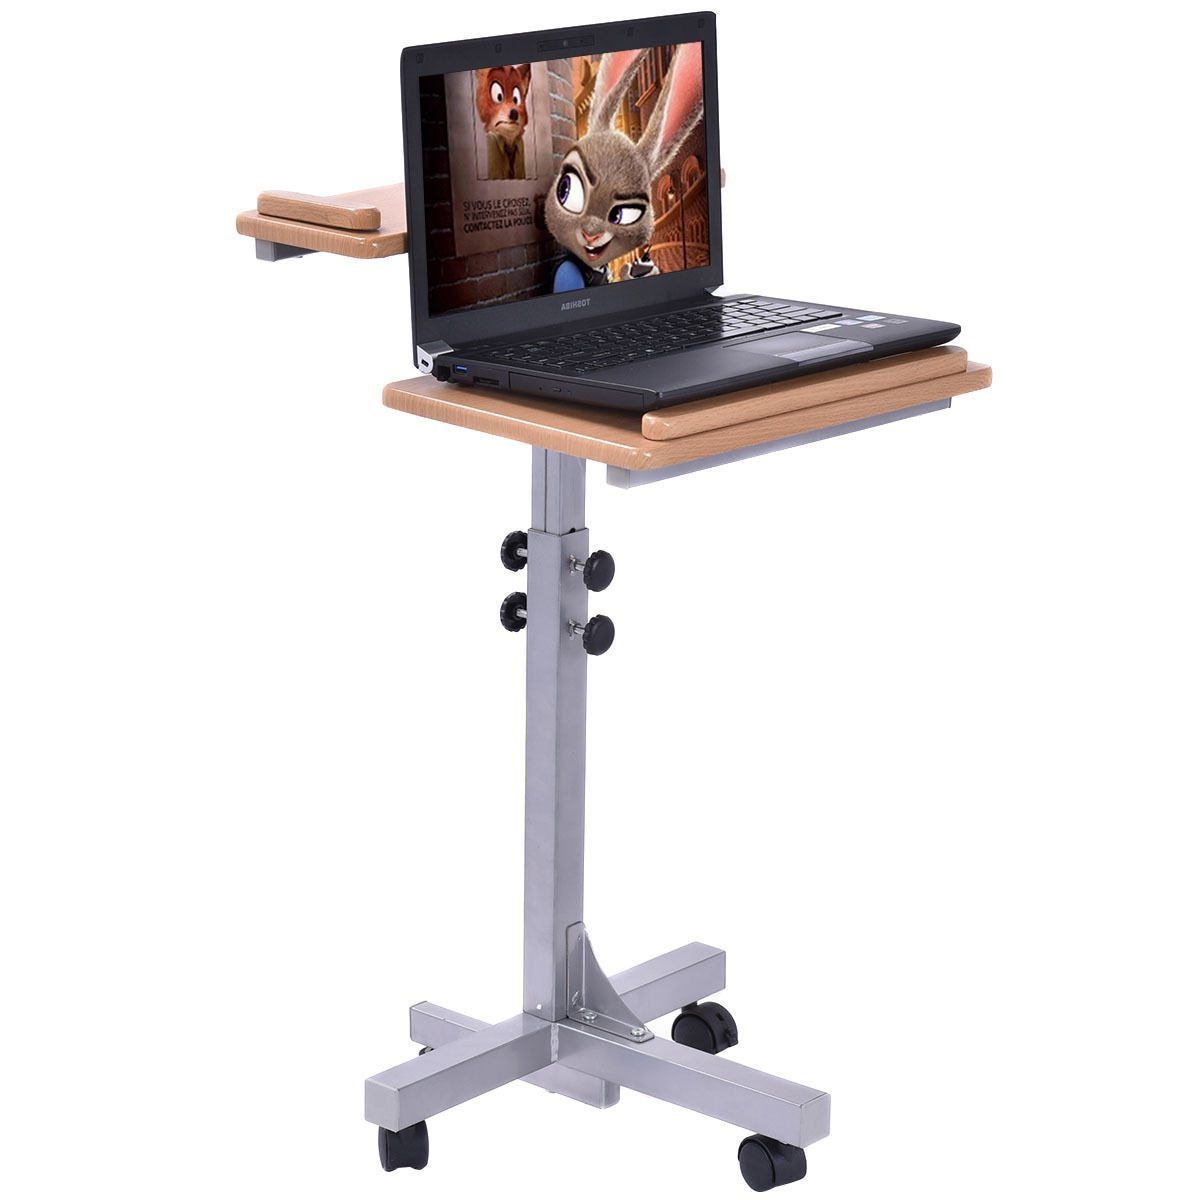 Adjustable Portable Rolling Laptop Stand Intended For Rolling Tv Stands With Wheels With Adjustable Metal Shelf (View 10 of 20)